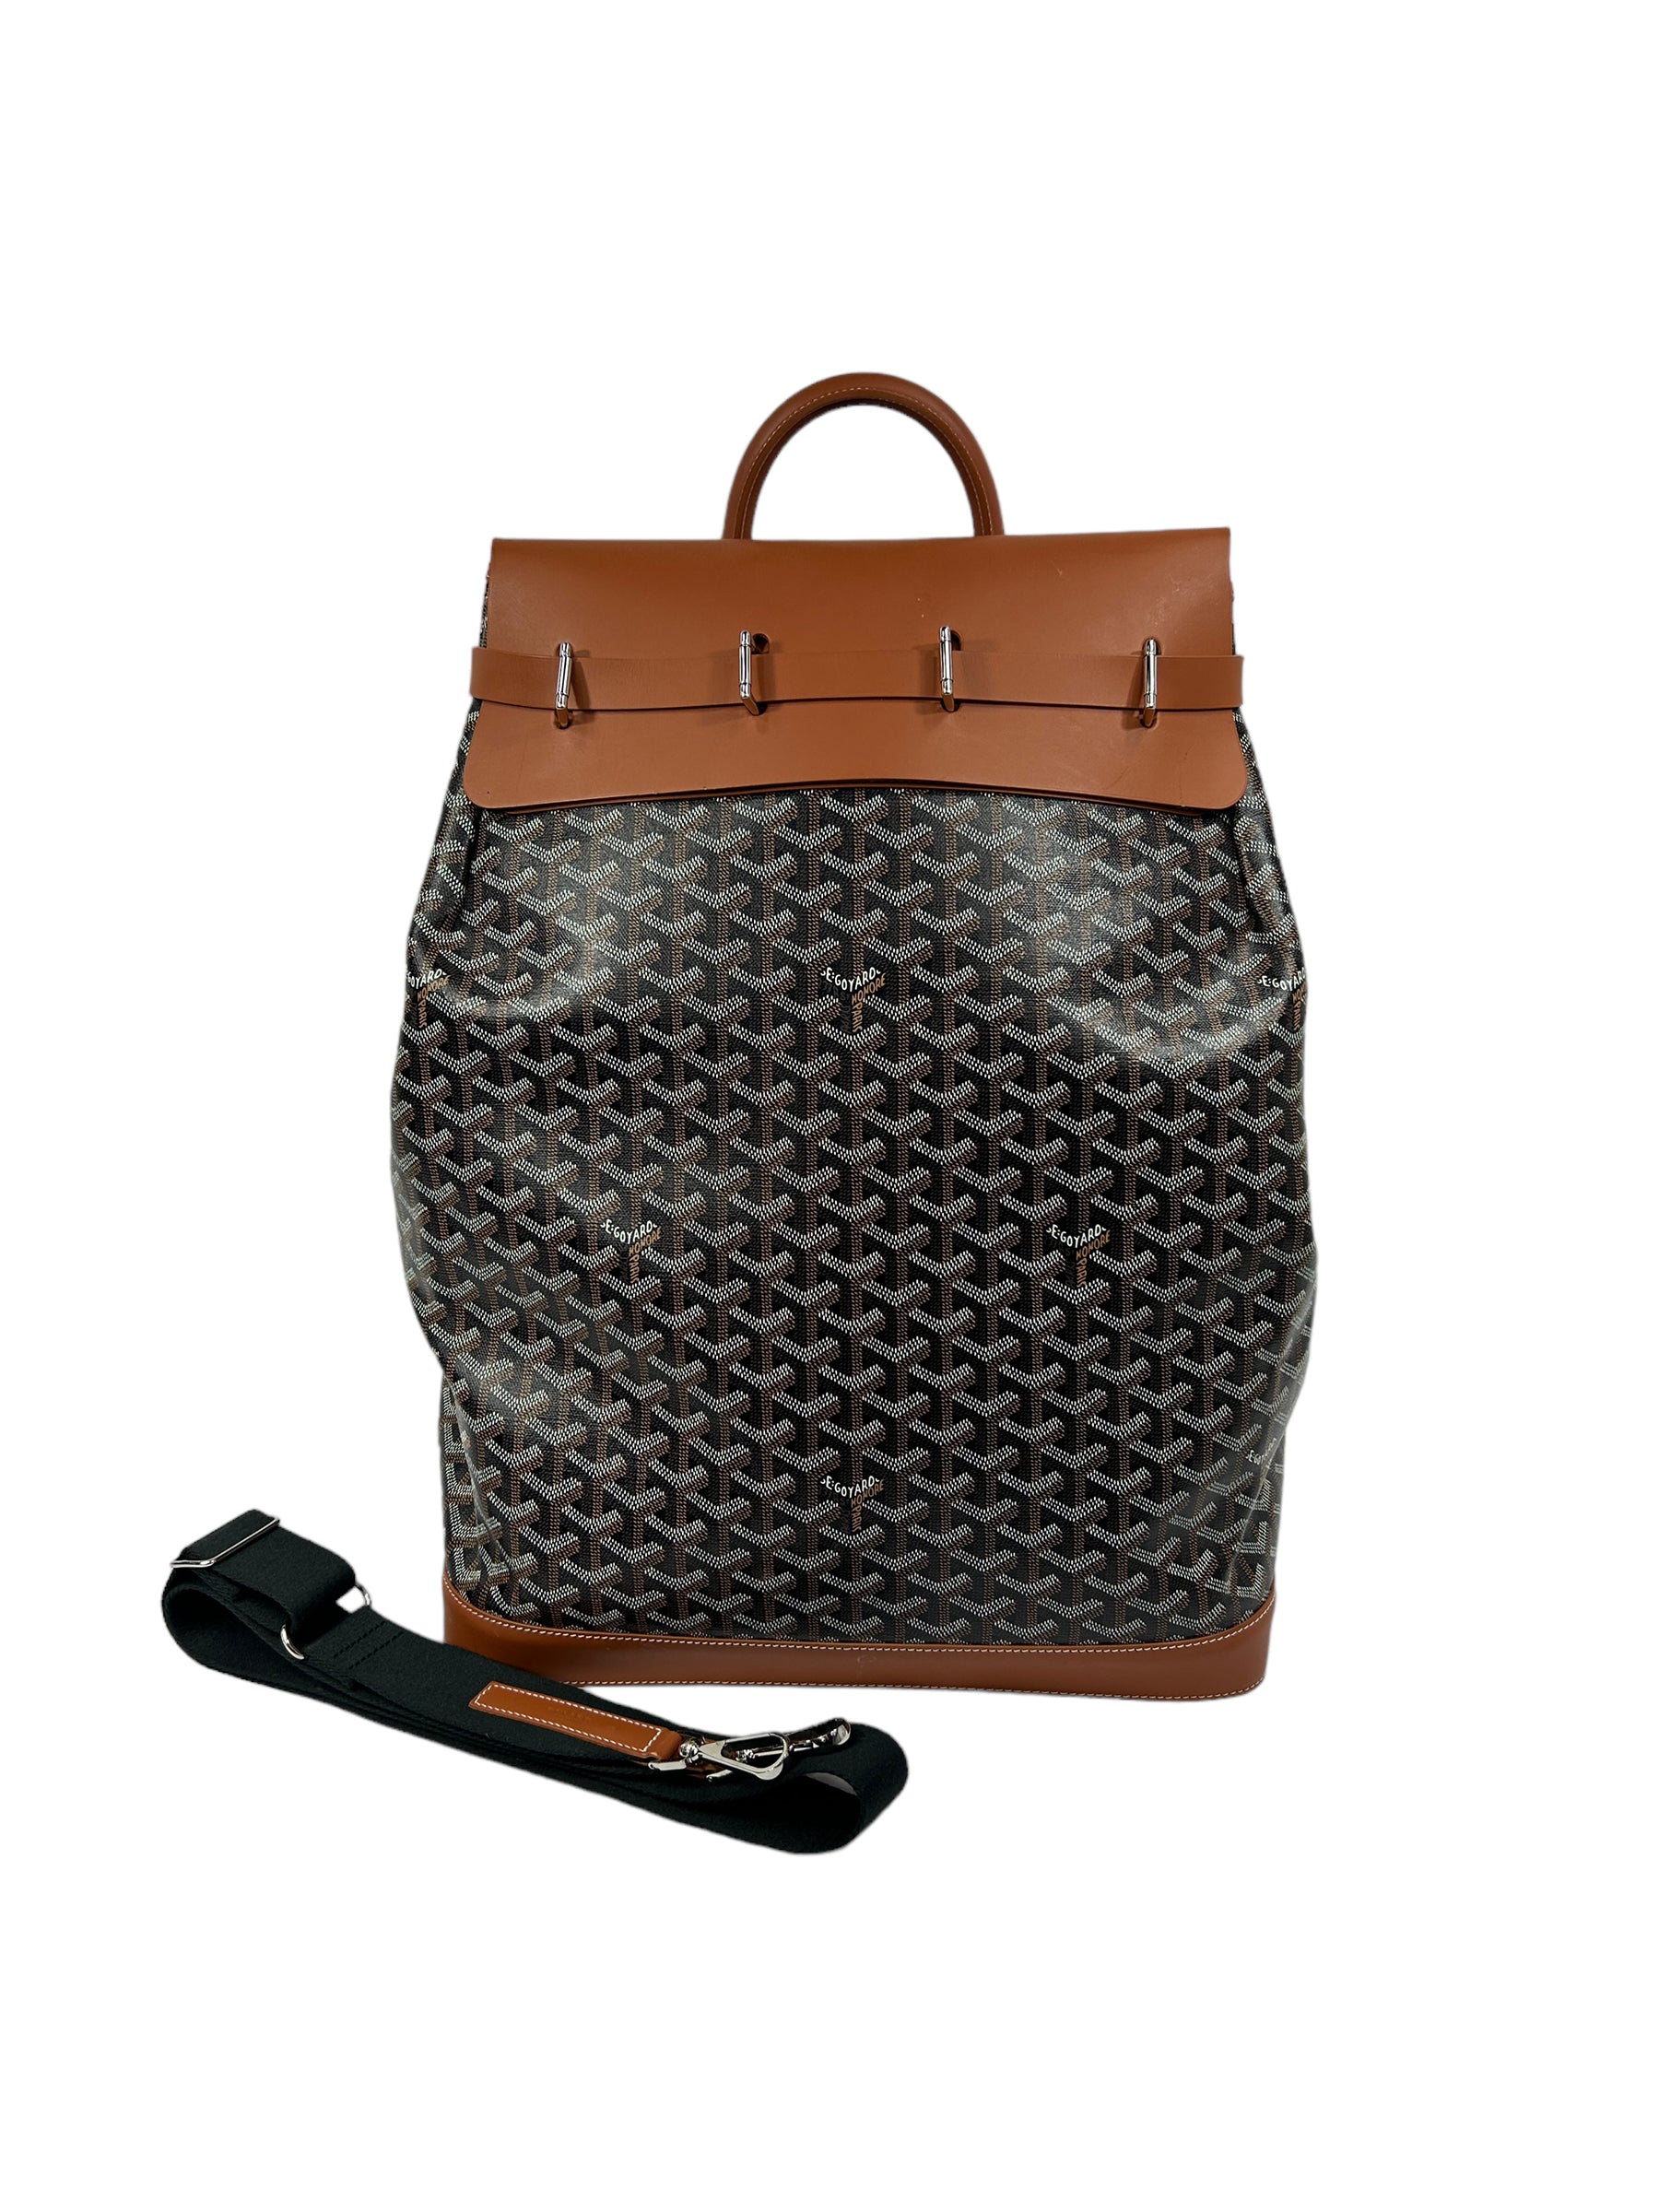 Monogram Coated Canvas/ Cowhide Leather Steamer PM Backpack w/SHW